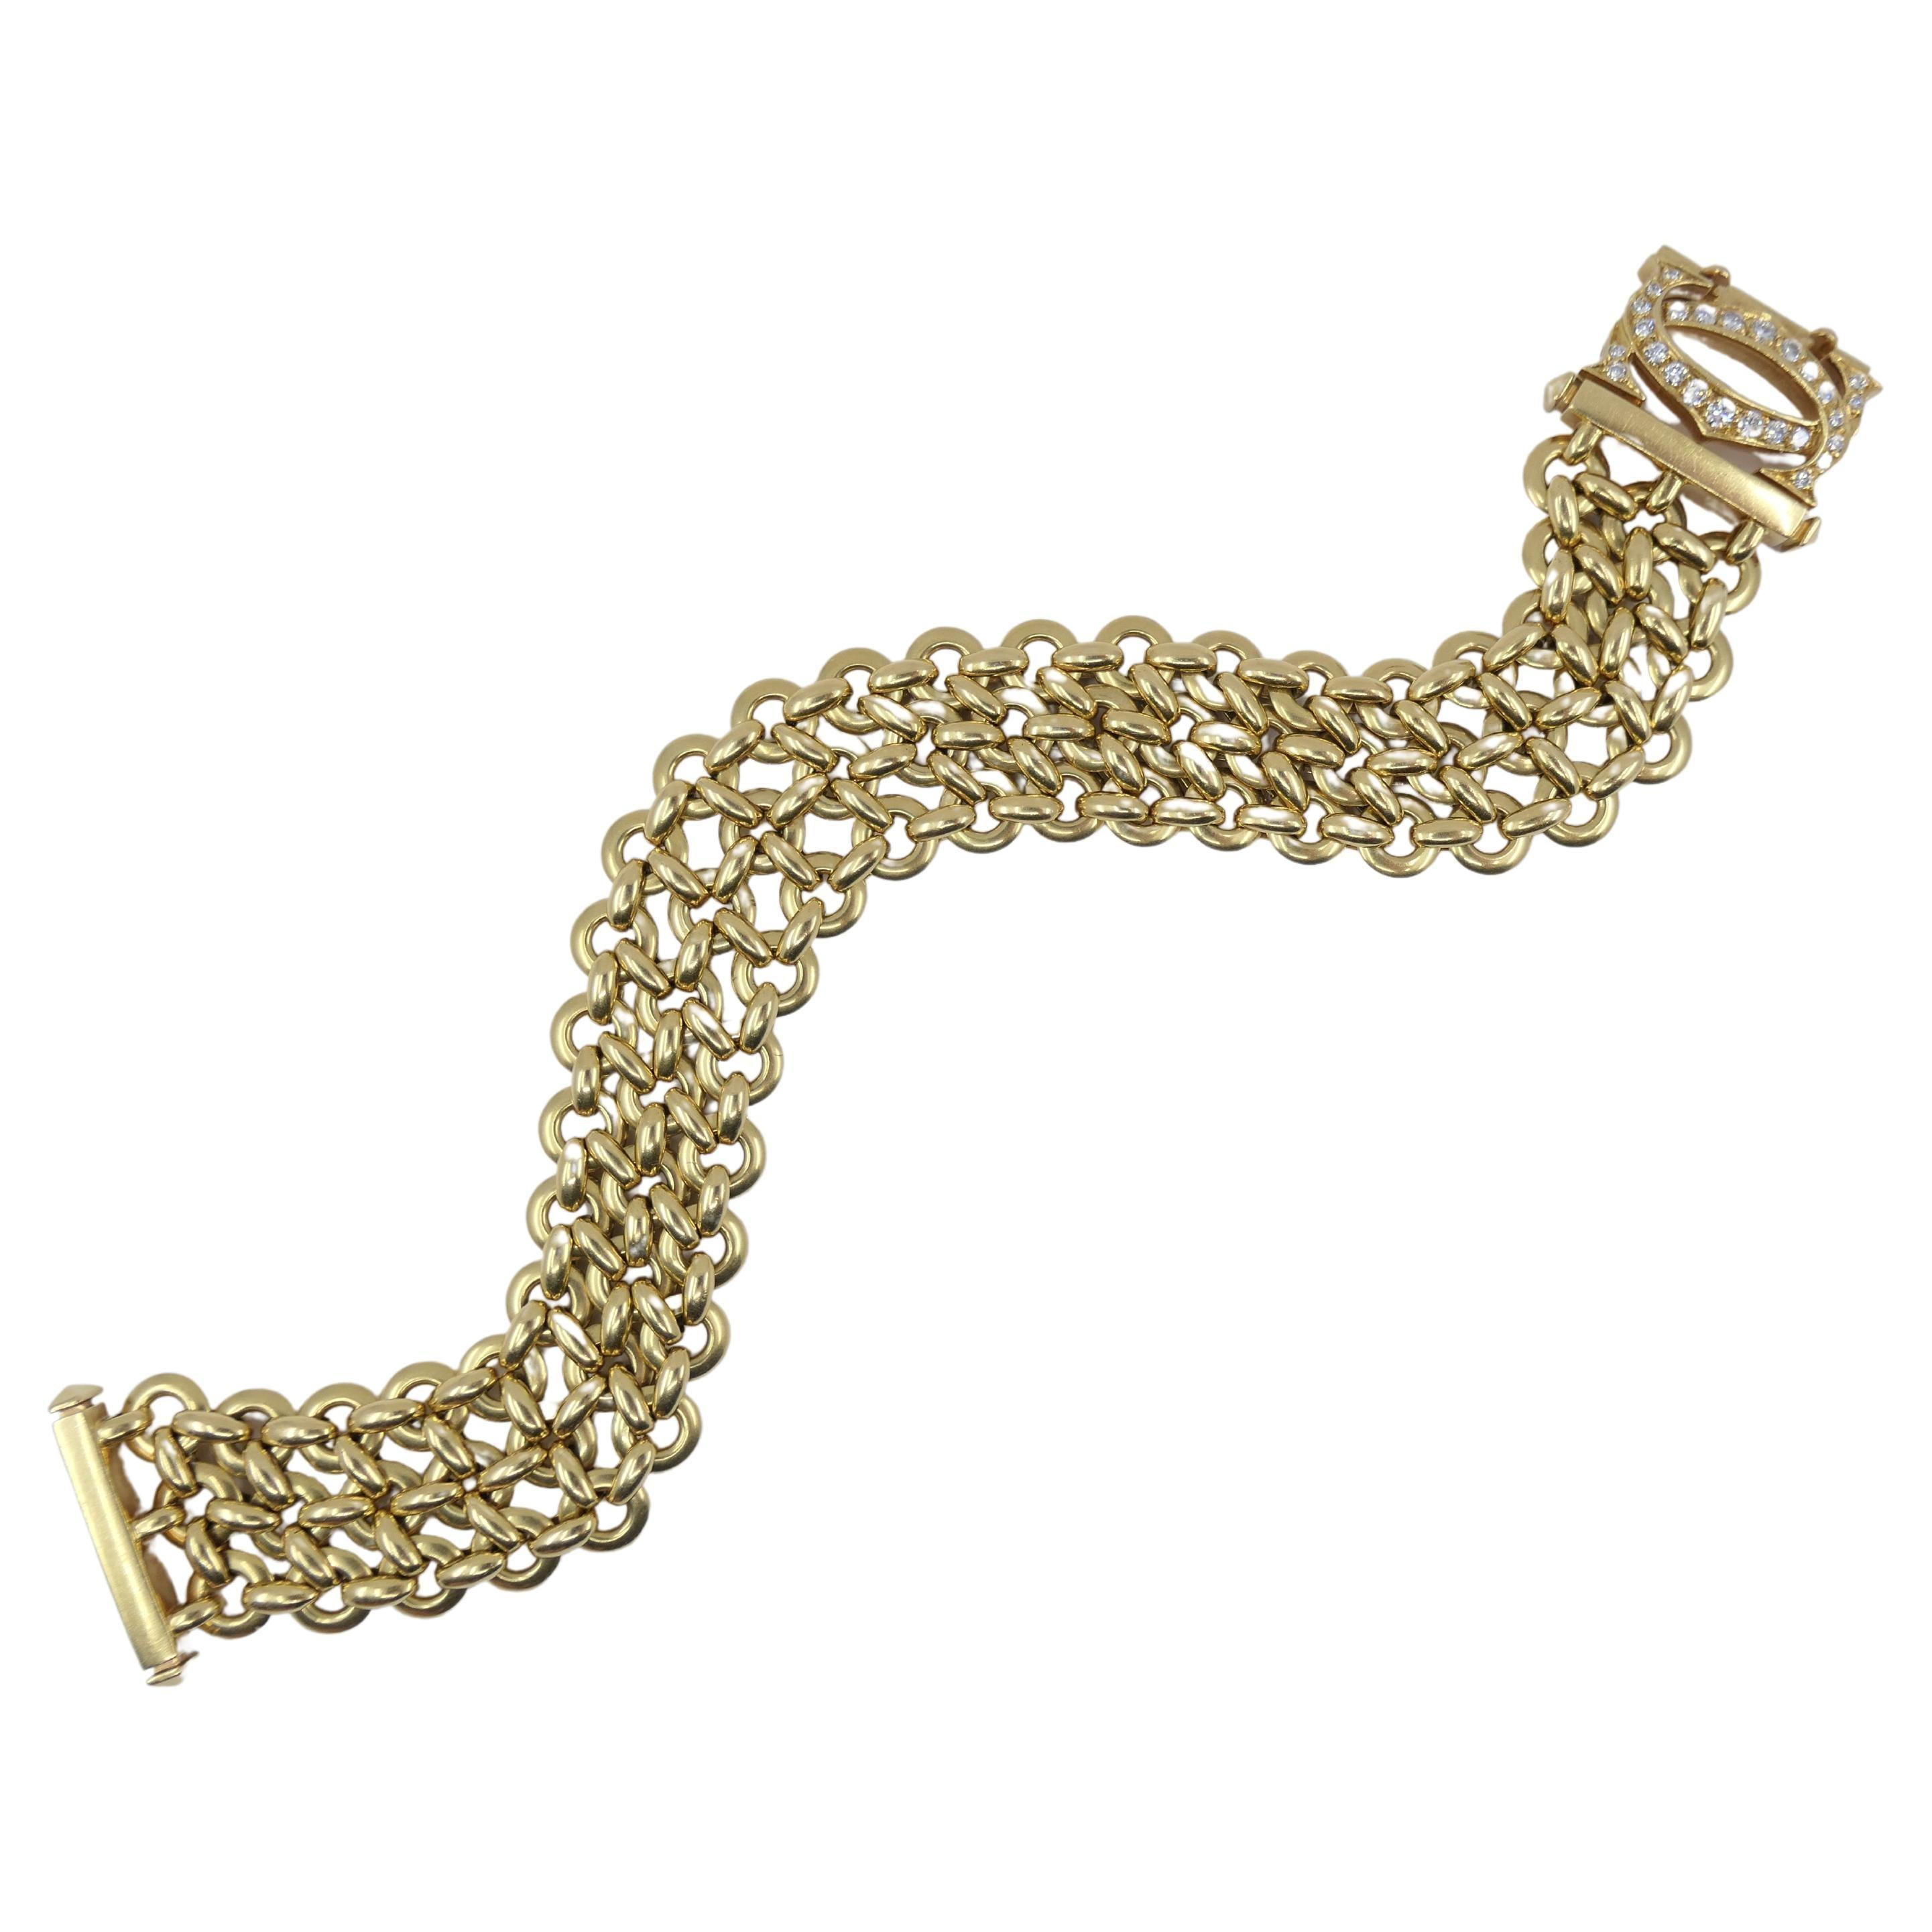 Vintage Cartier Double C Penelope Gold Diamond Bracelet In Excellent Condition For Sale In Beverly Hills, CA